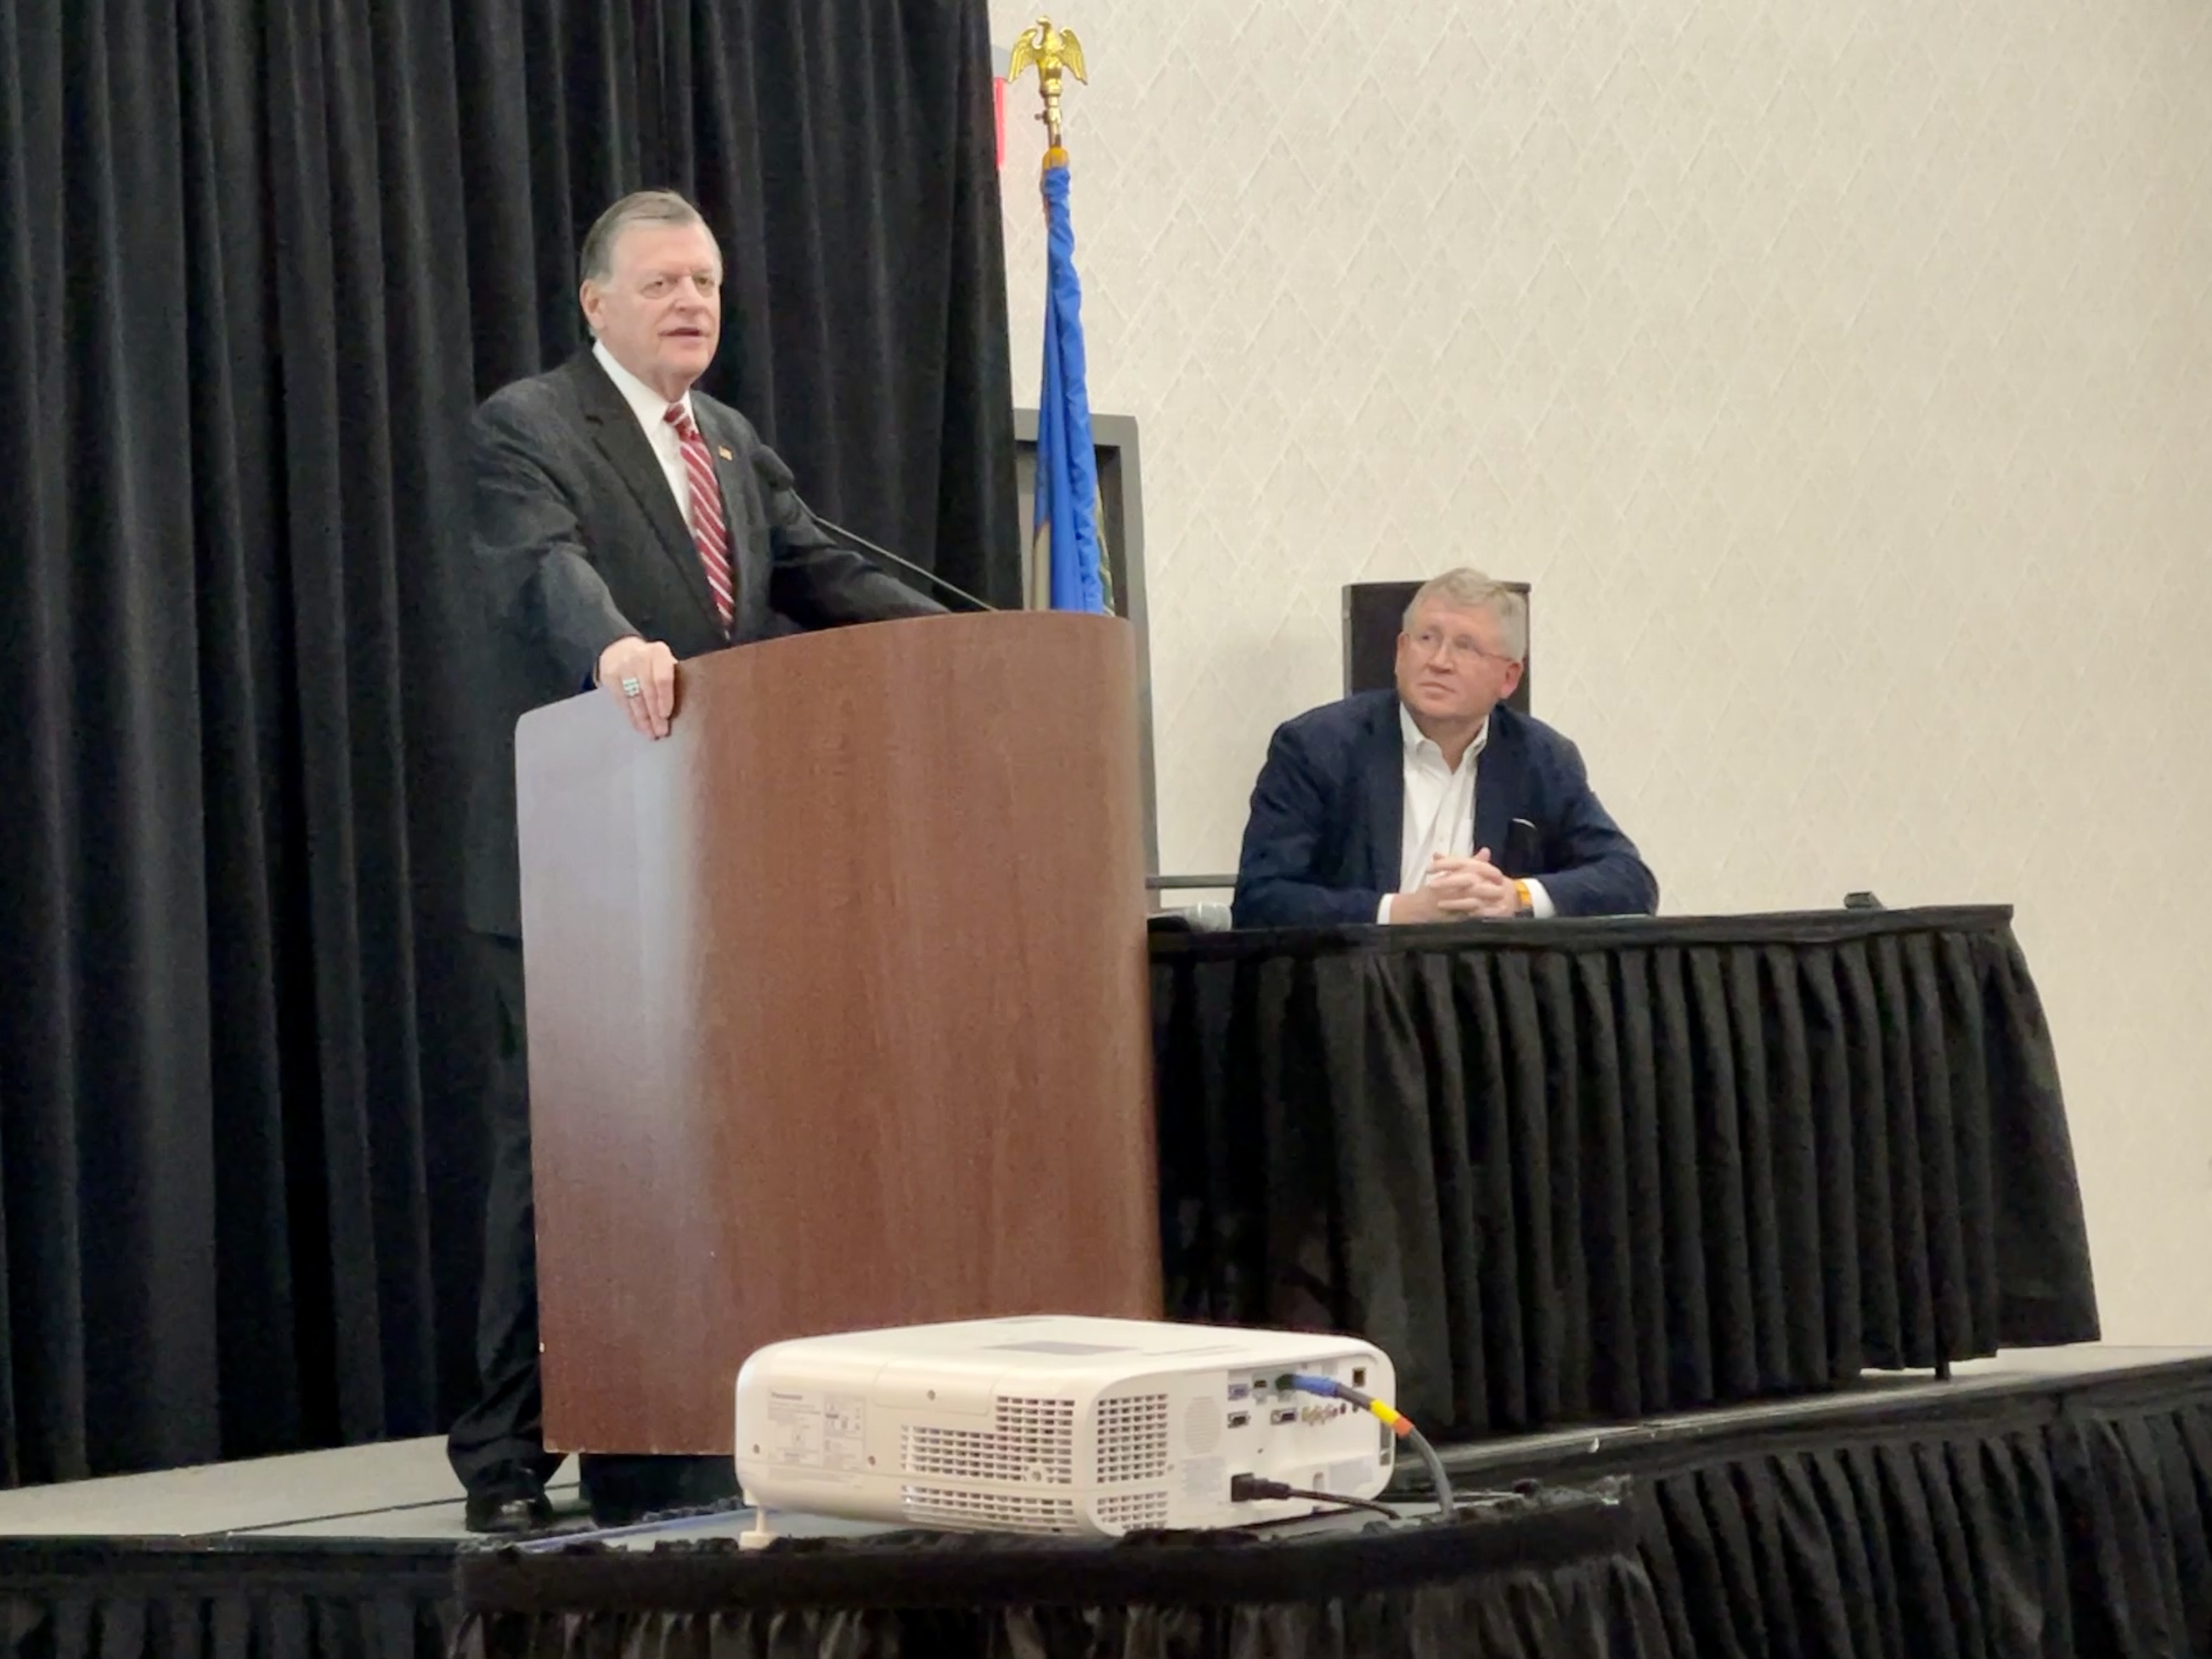 Cattle Producers Cover Lots of Policy Ground as They Prepare to Engage with Lawmakers in 2022 State Legislative Session